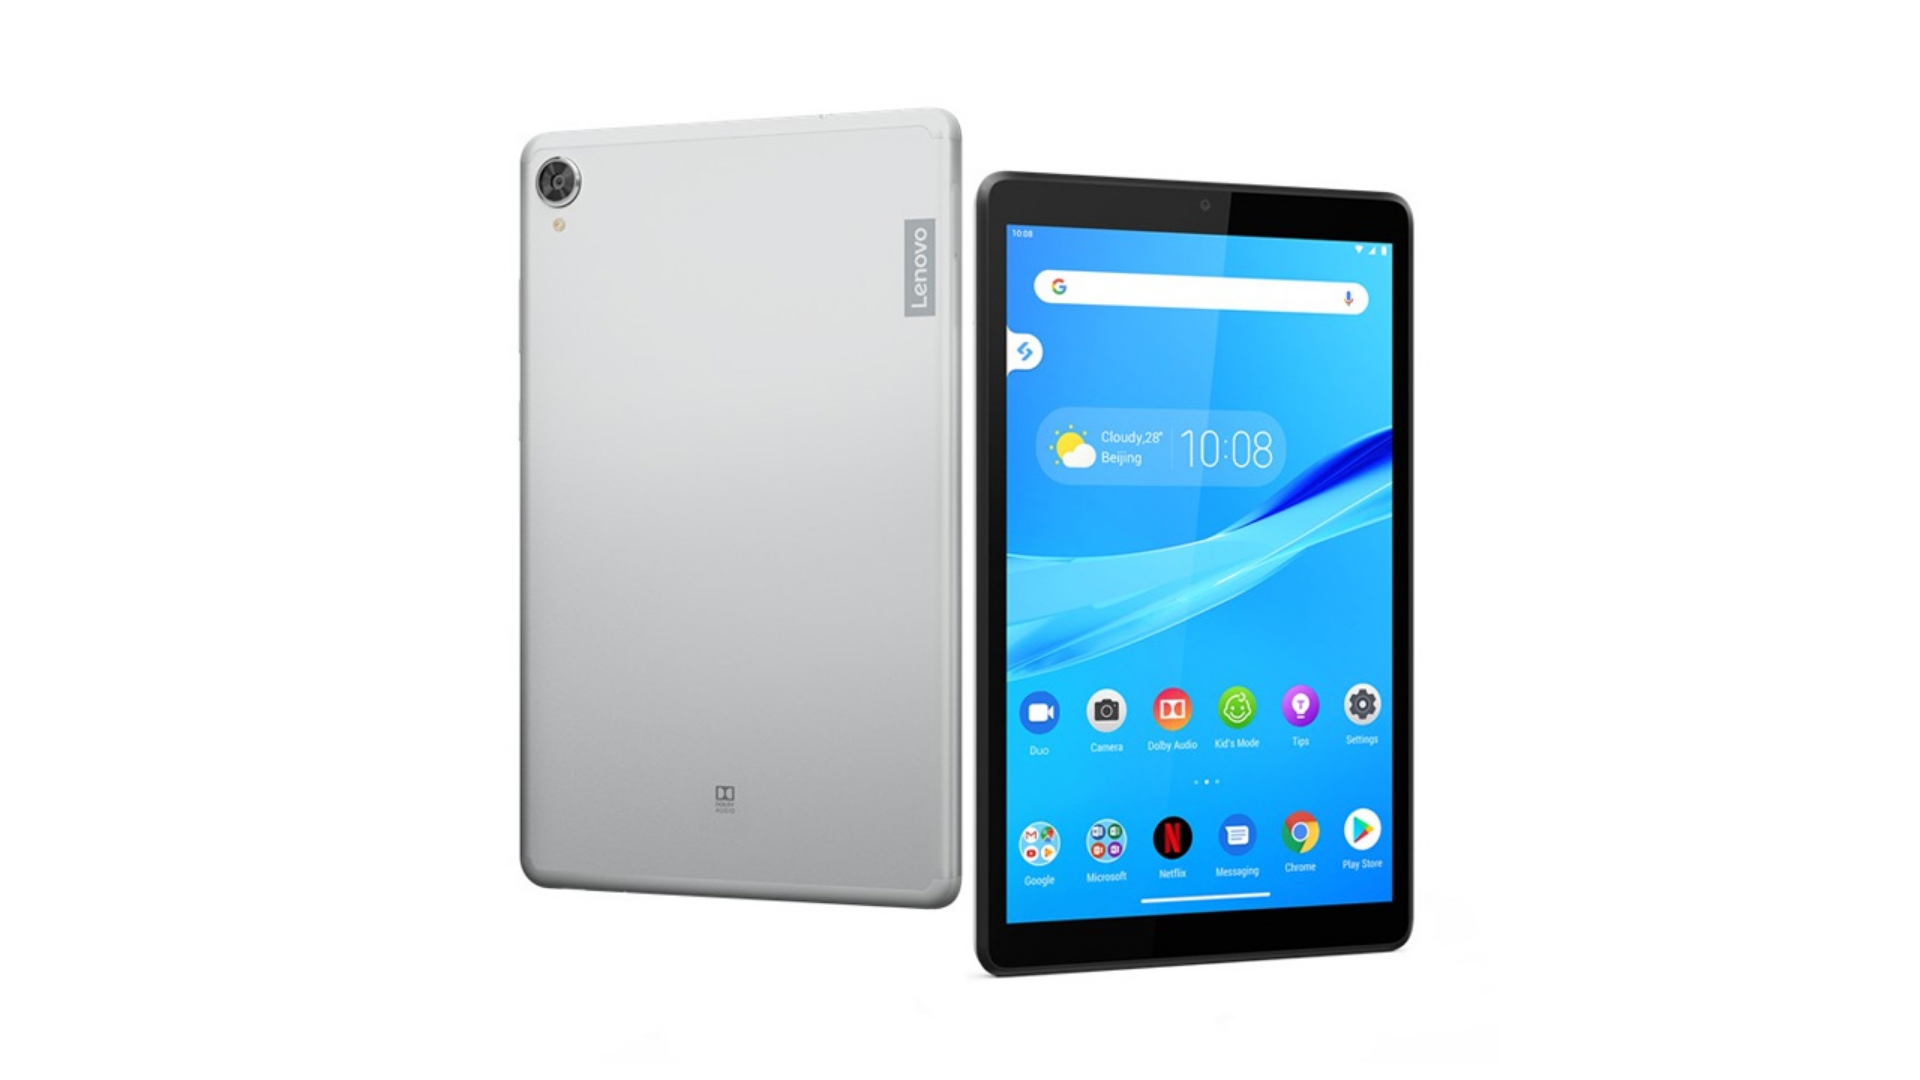 Shopee Offers Buy 1 Get 1 Deal on Lenovo Tab M8 HD LTE